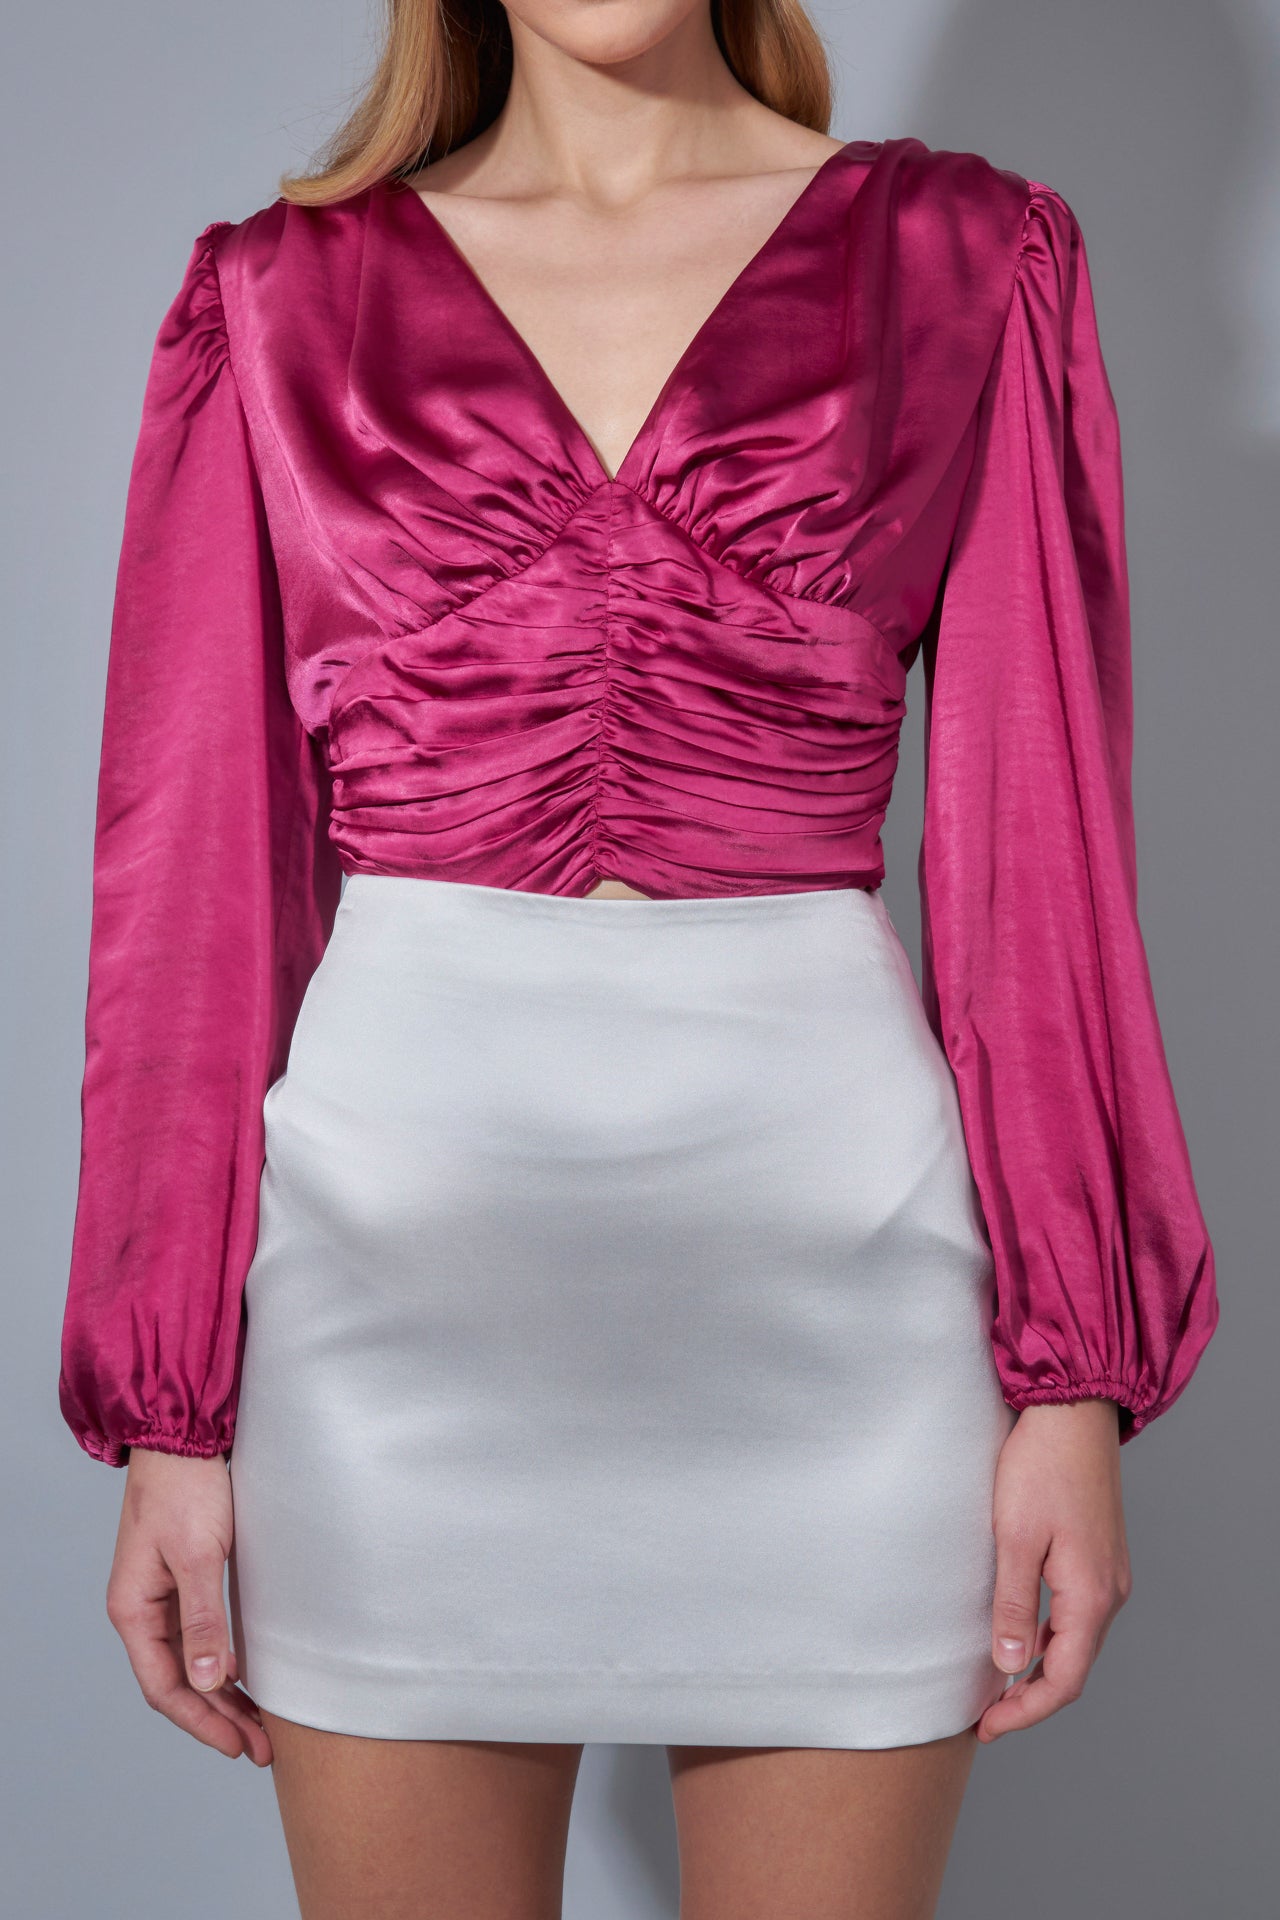 Endless Rose - Satin Ruched Top - Tops in Women's Clothing available at endlessrose.com